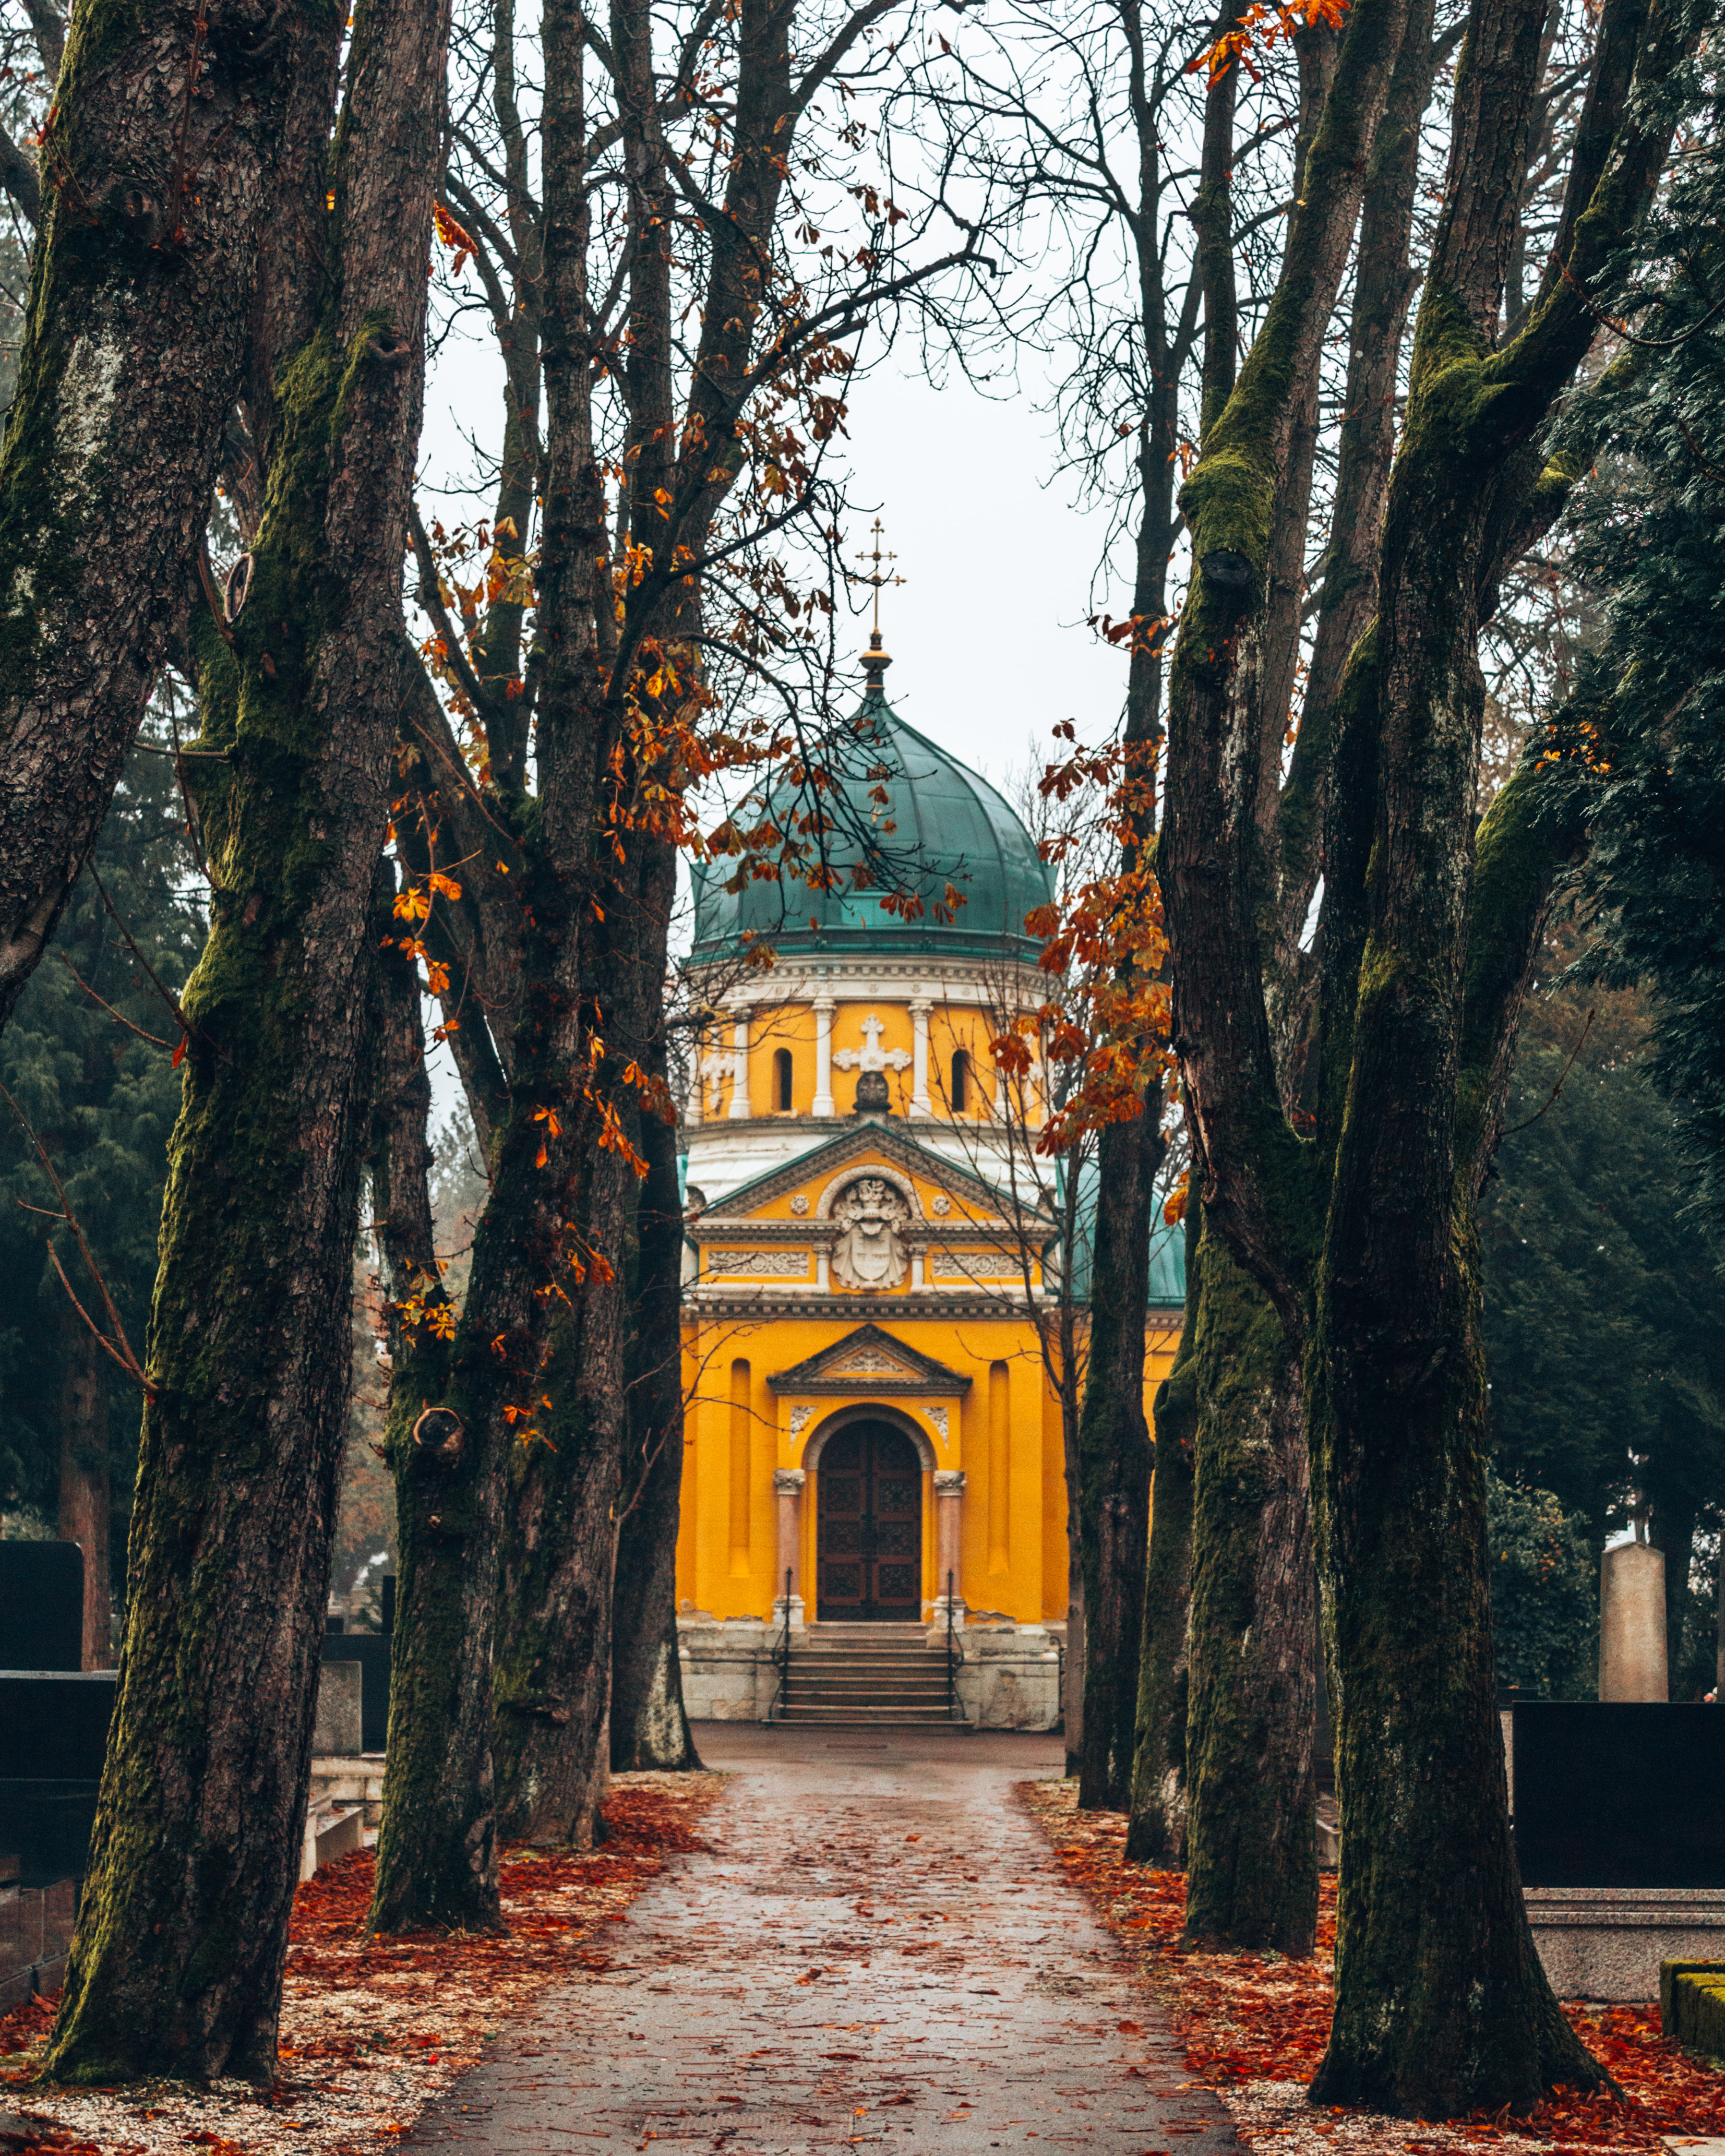 A path covered by trees at the Mirogoj cemetery in Zagreb, Croatia